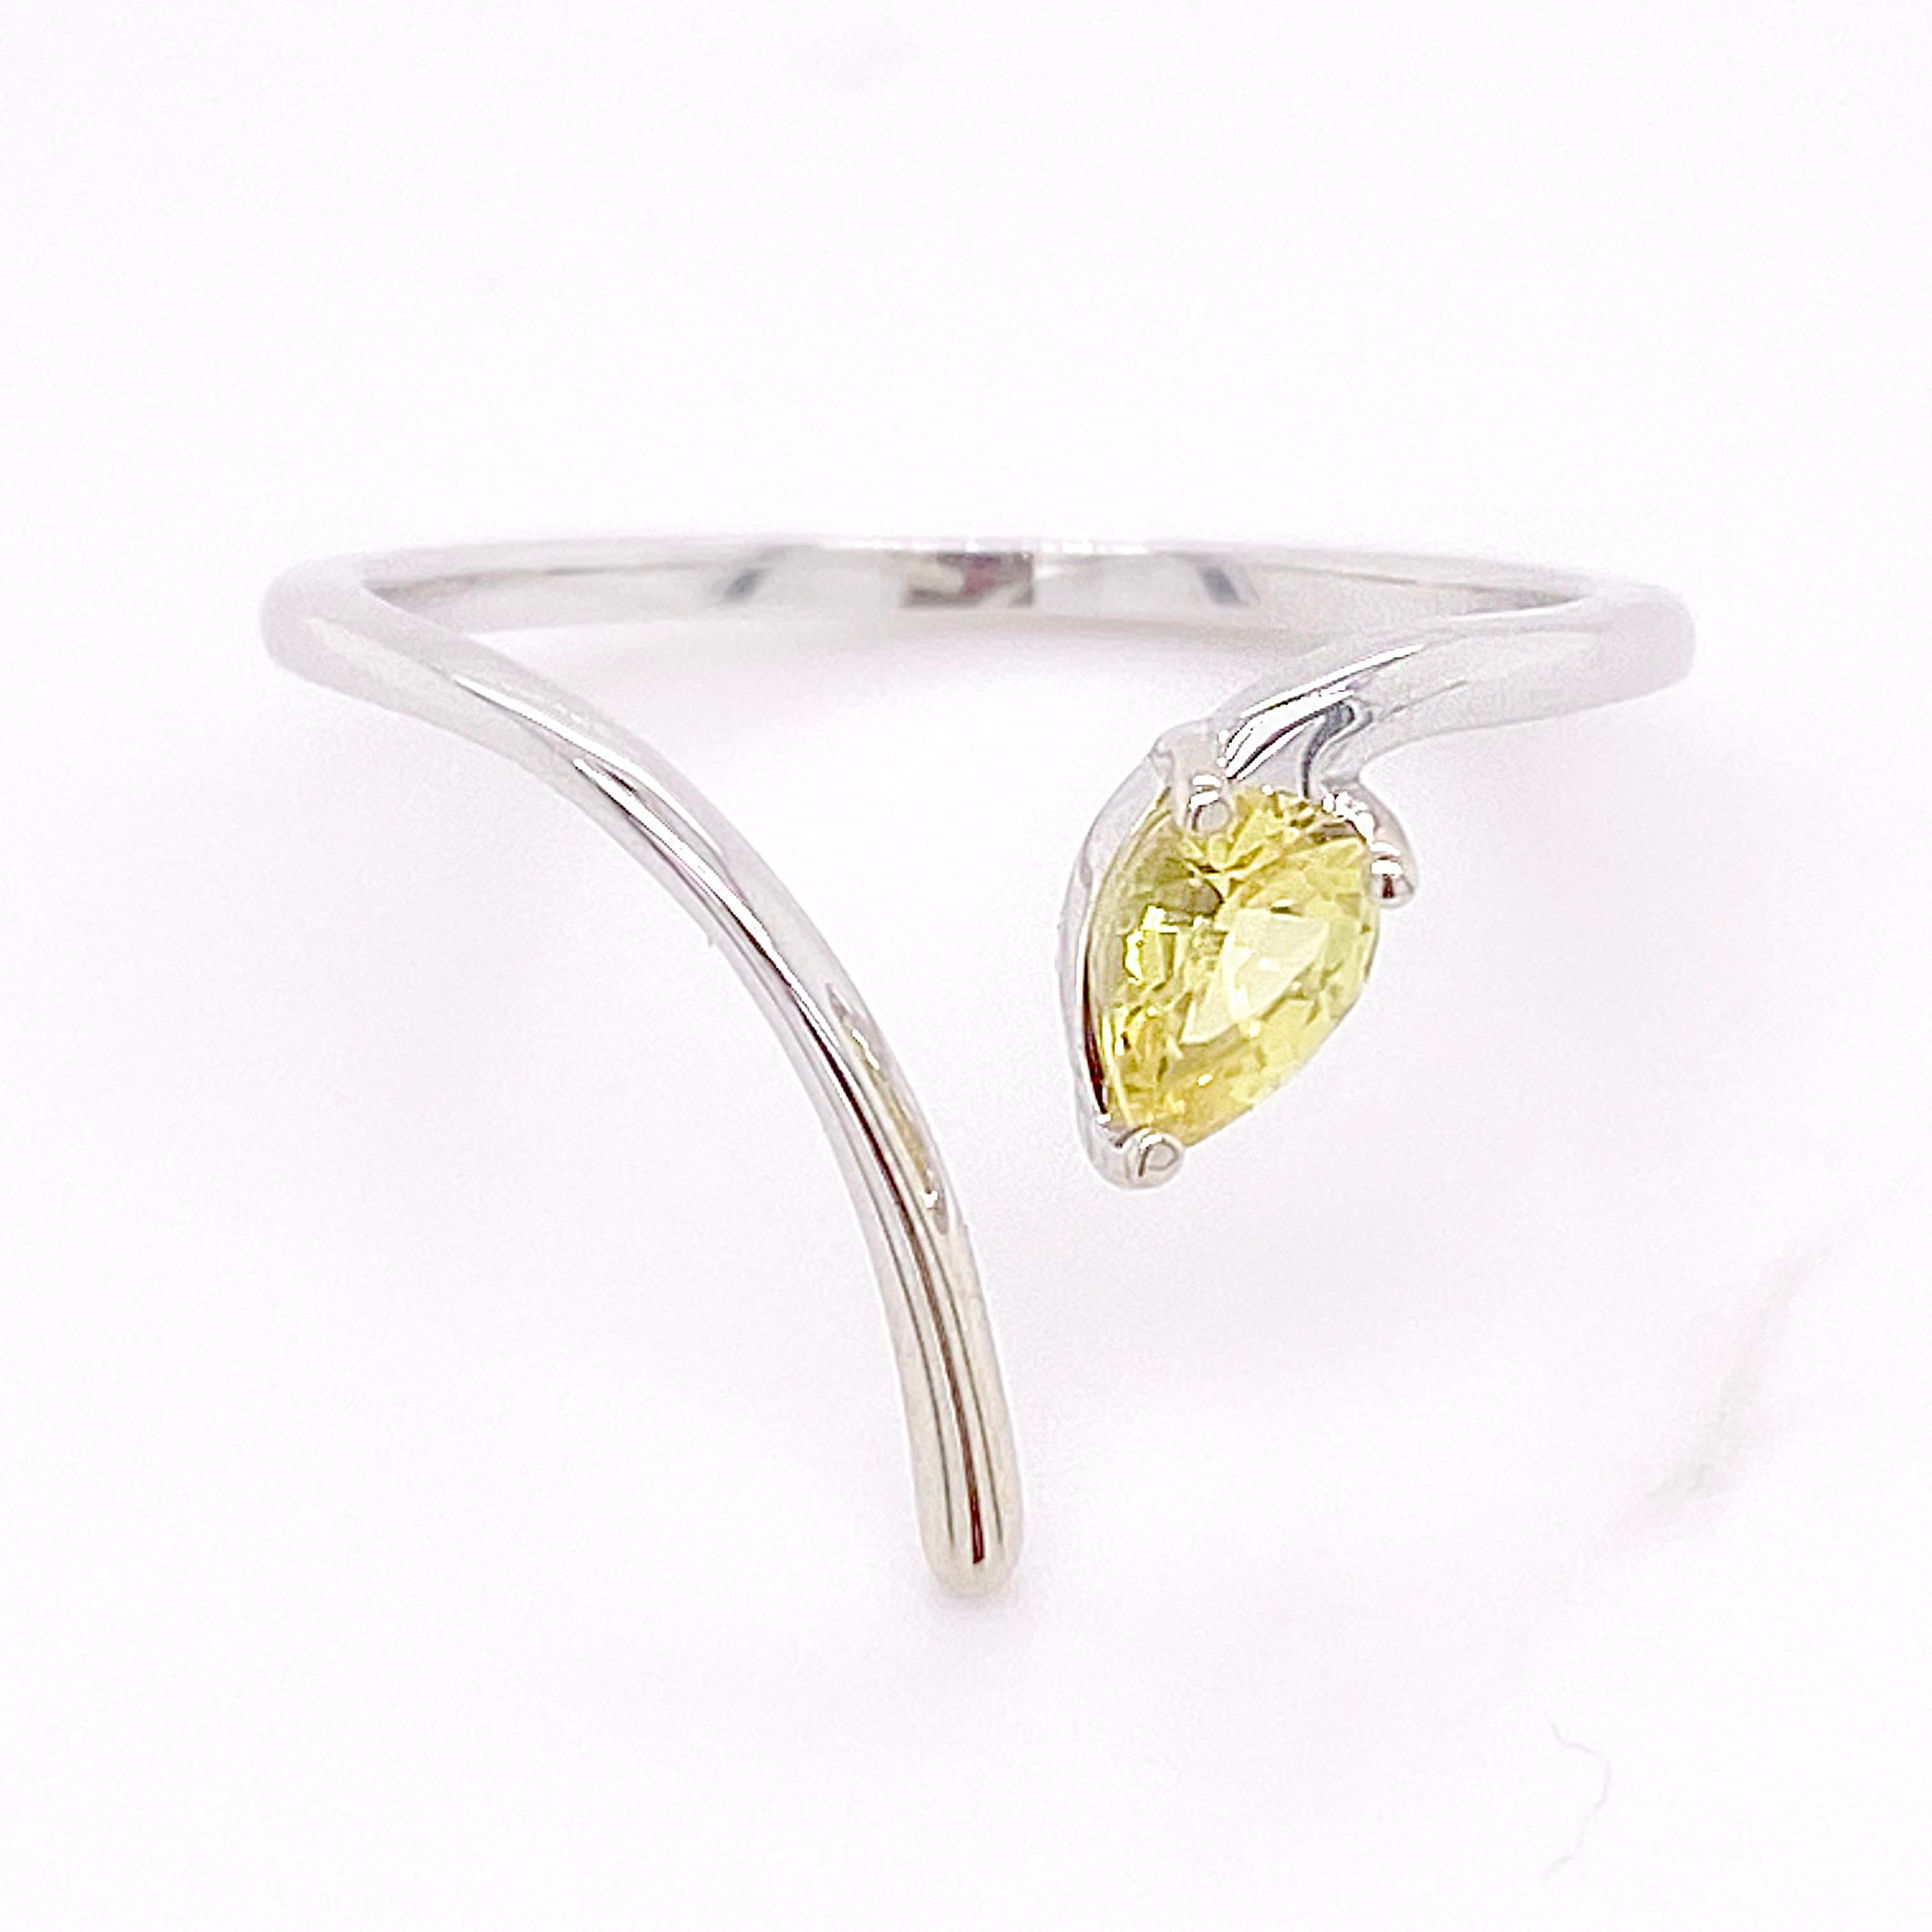 This unique yellow sapphire is a pear shaped gemstone that weighs 1/2 carat. The negative space design looks fab on any finger. The 14 karat white gold is very shiny and high polished. 14 karat white gold is 40 times harder than sterling silver and